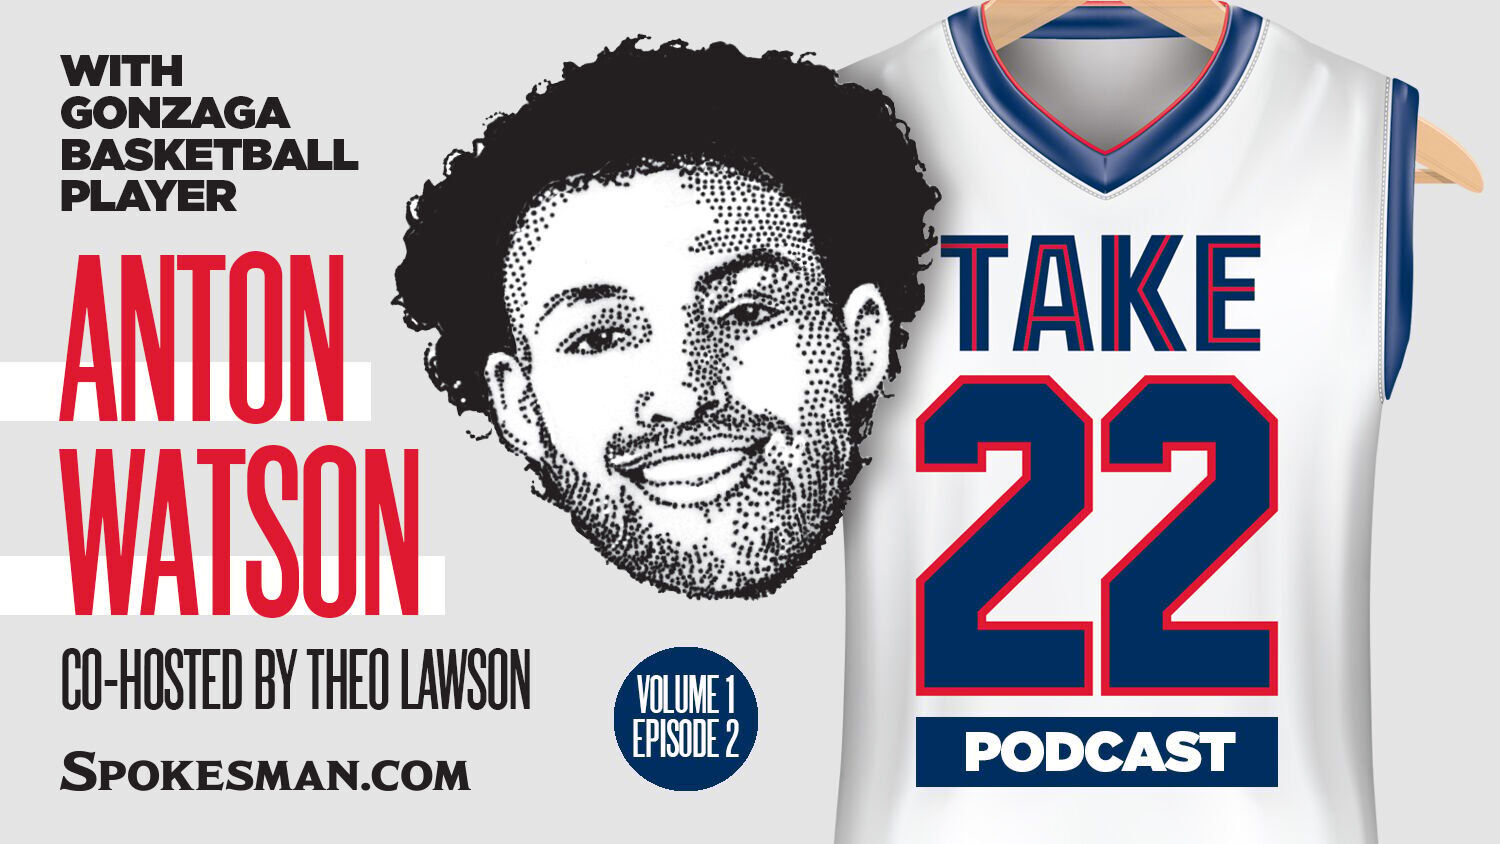 Take 22 Podcast with Anton Watson (episode 2) A conversation about poster dunks, Kennel noise and Super Bowl snacks, capped by a Watson family reunion Nonstop Local Sports khq